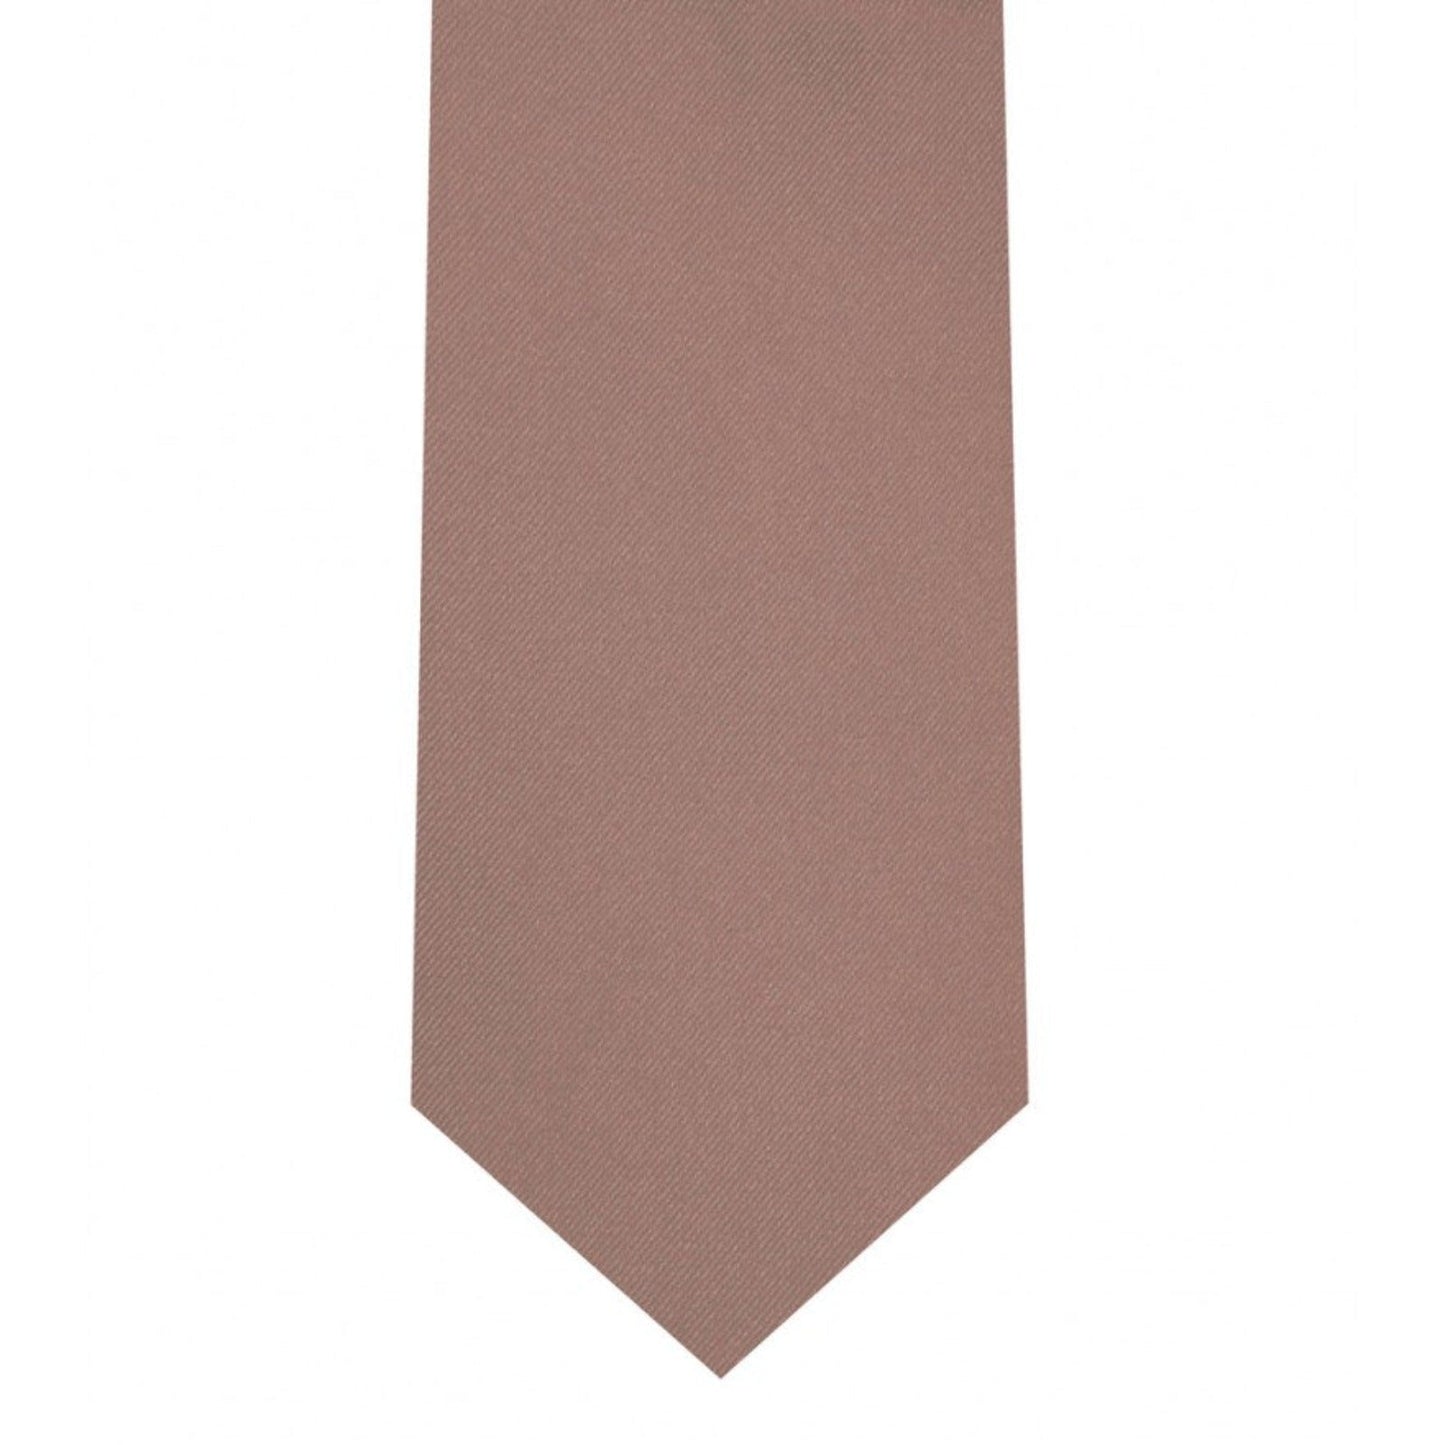 Classic Mauve Tie Skinny width 2.75 inches With Matching Pocket Square | KCT Menswear